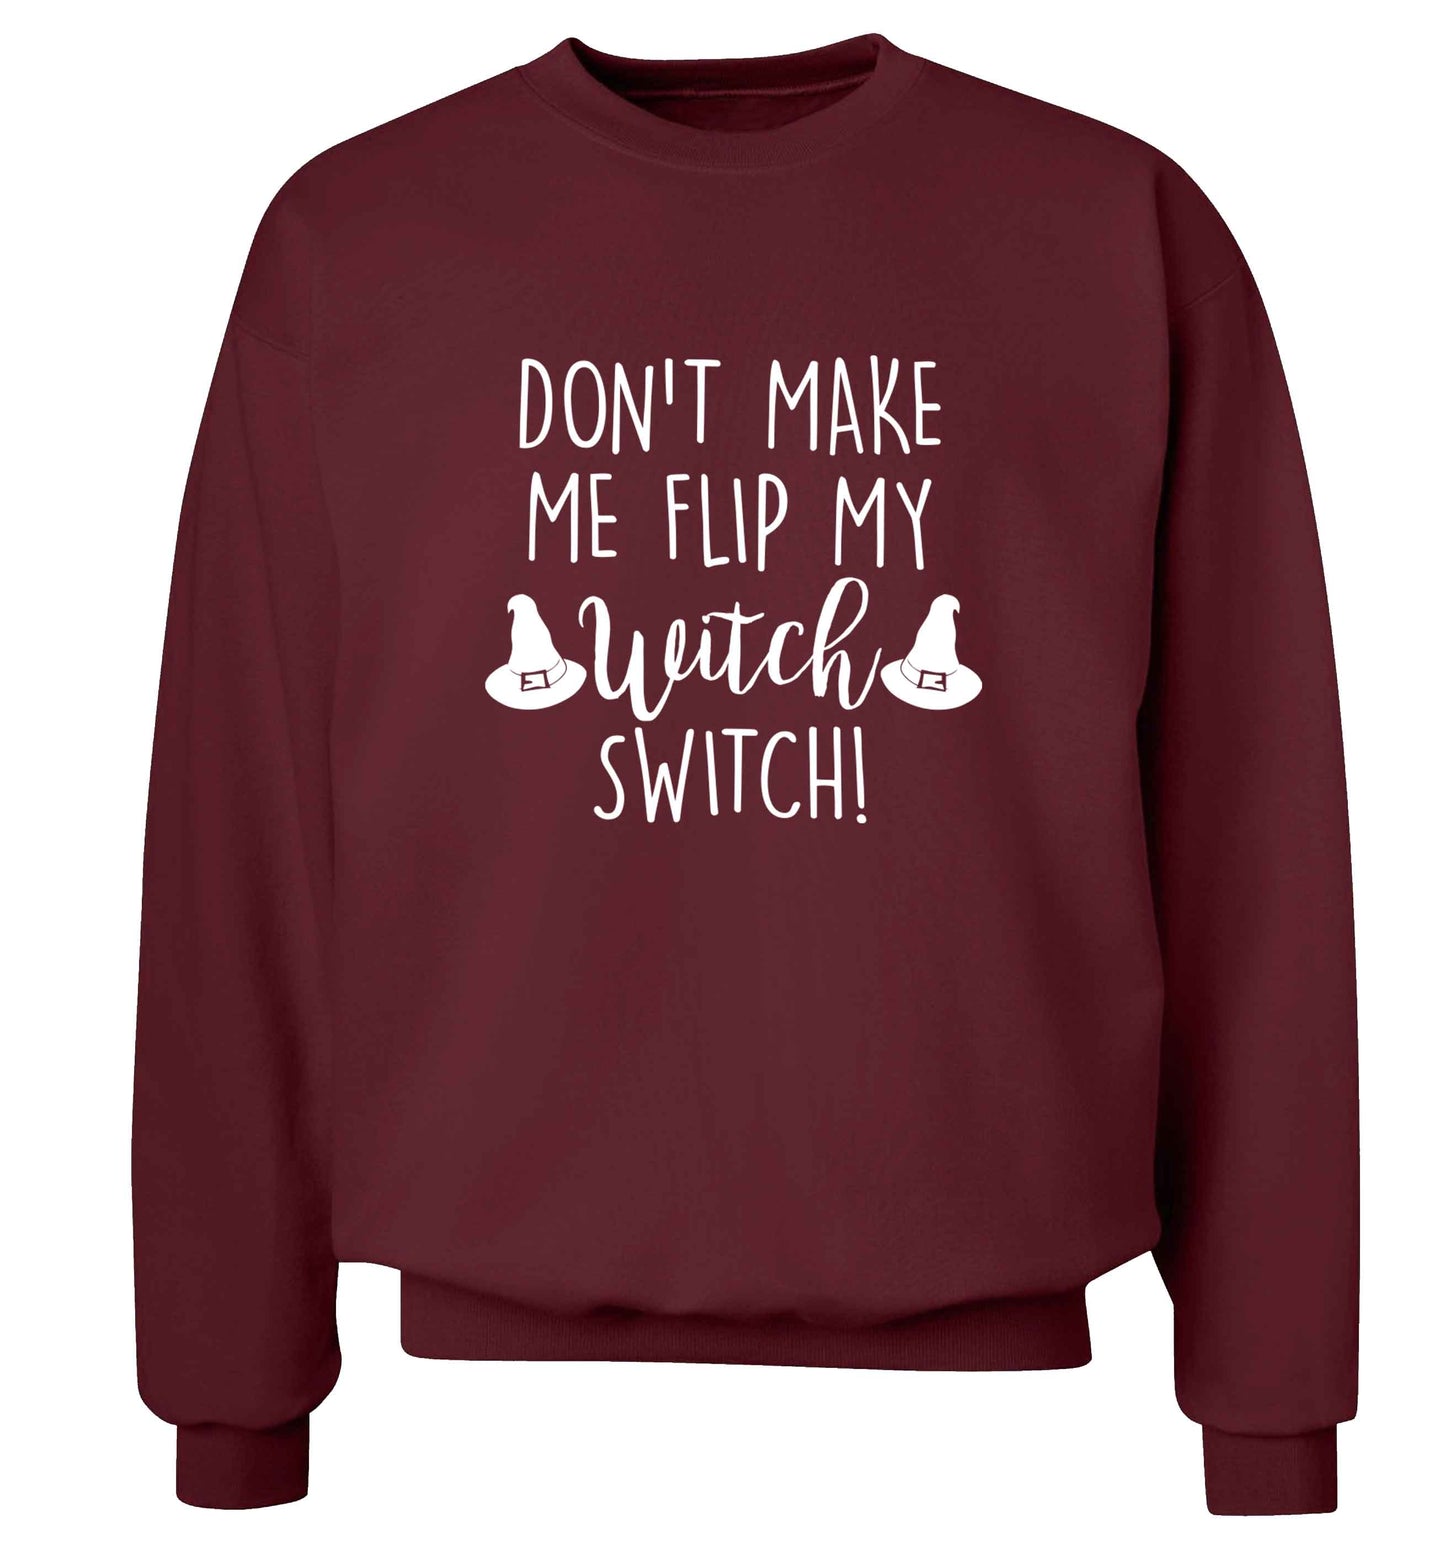 Don't make me flip my witch switch adult's unisex maroon sweater 2XL